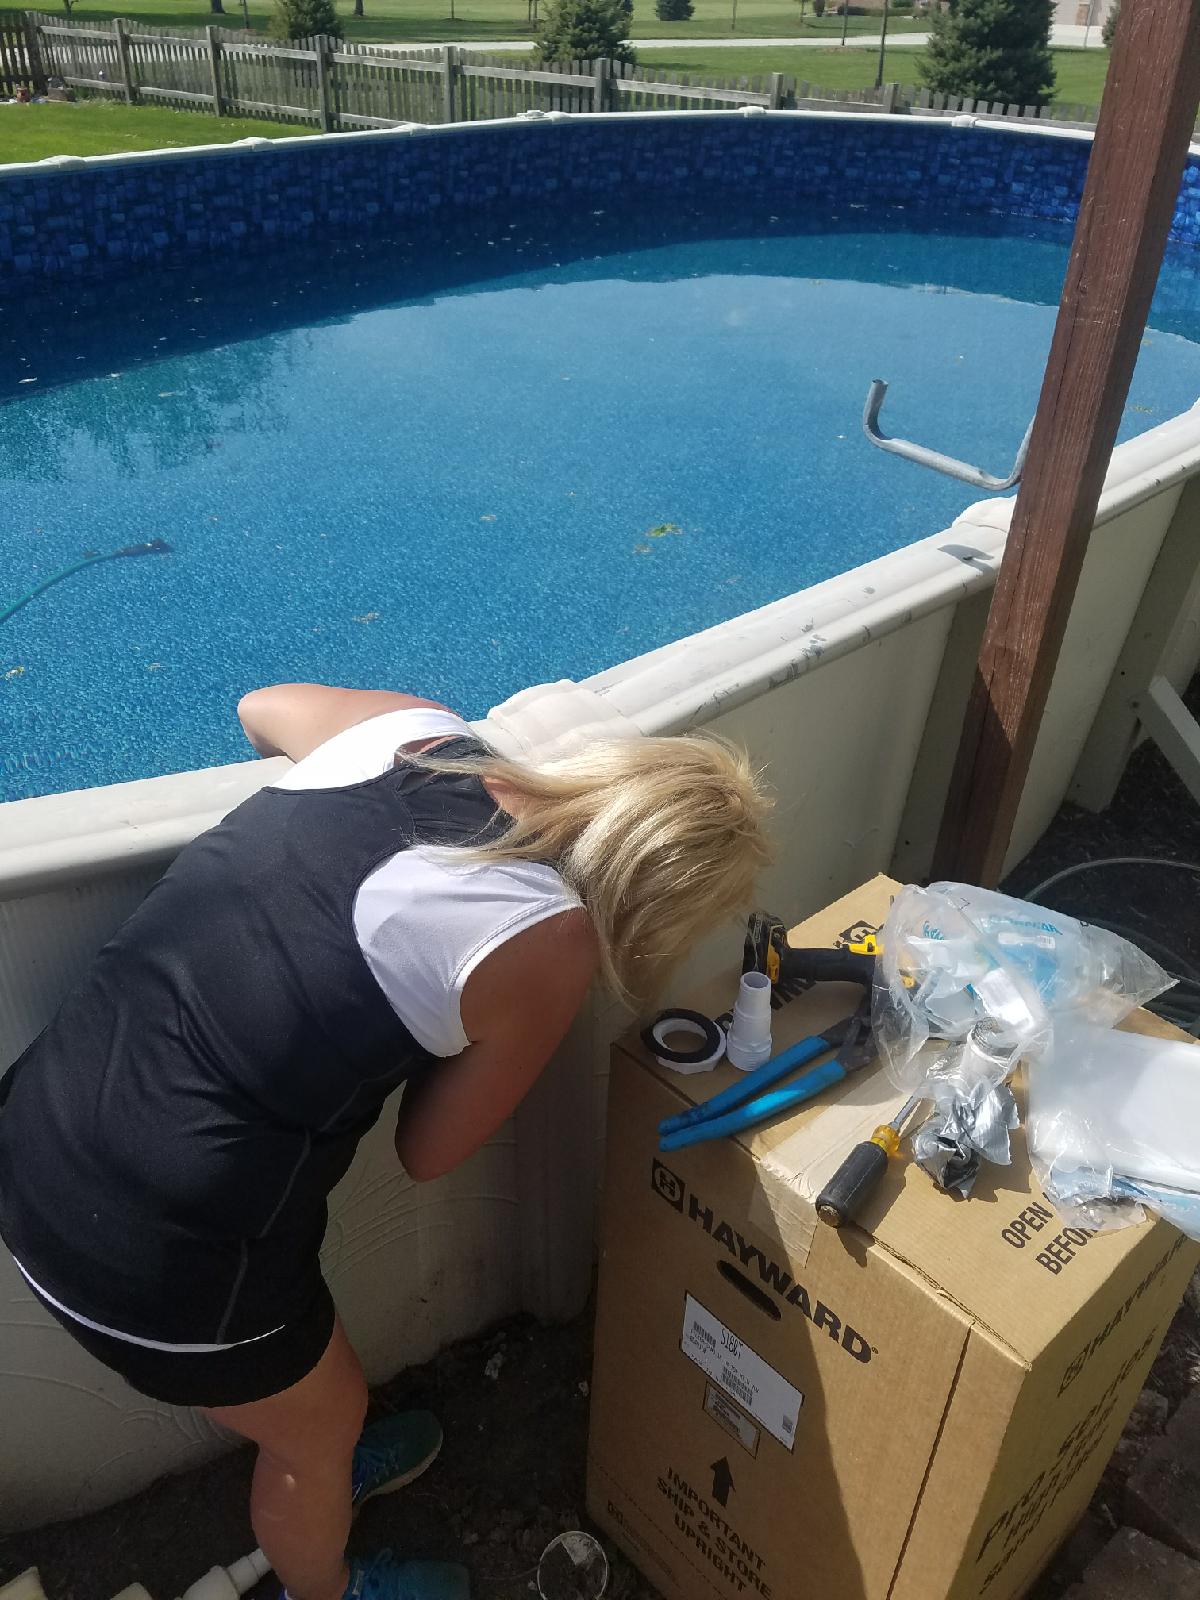 Your pool equipment is one of the most important elements of your swimming pool. It is the source and method for water circulation - the key to the purification process. Keeping your swimming pool filter healthy is a key element and our secret for success!